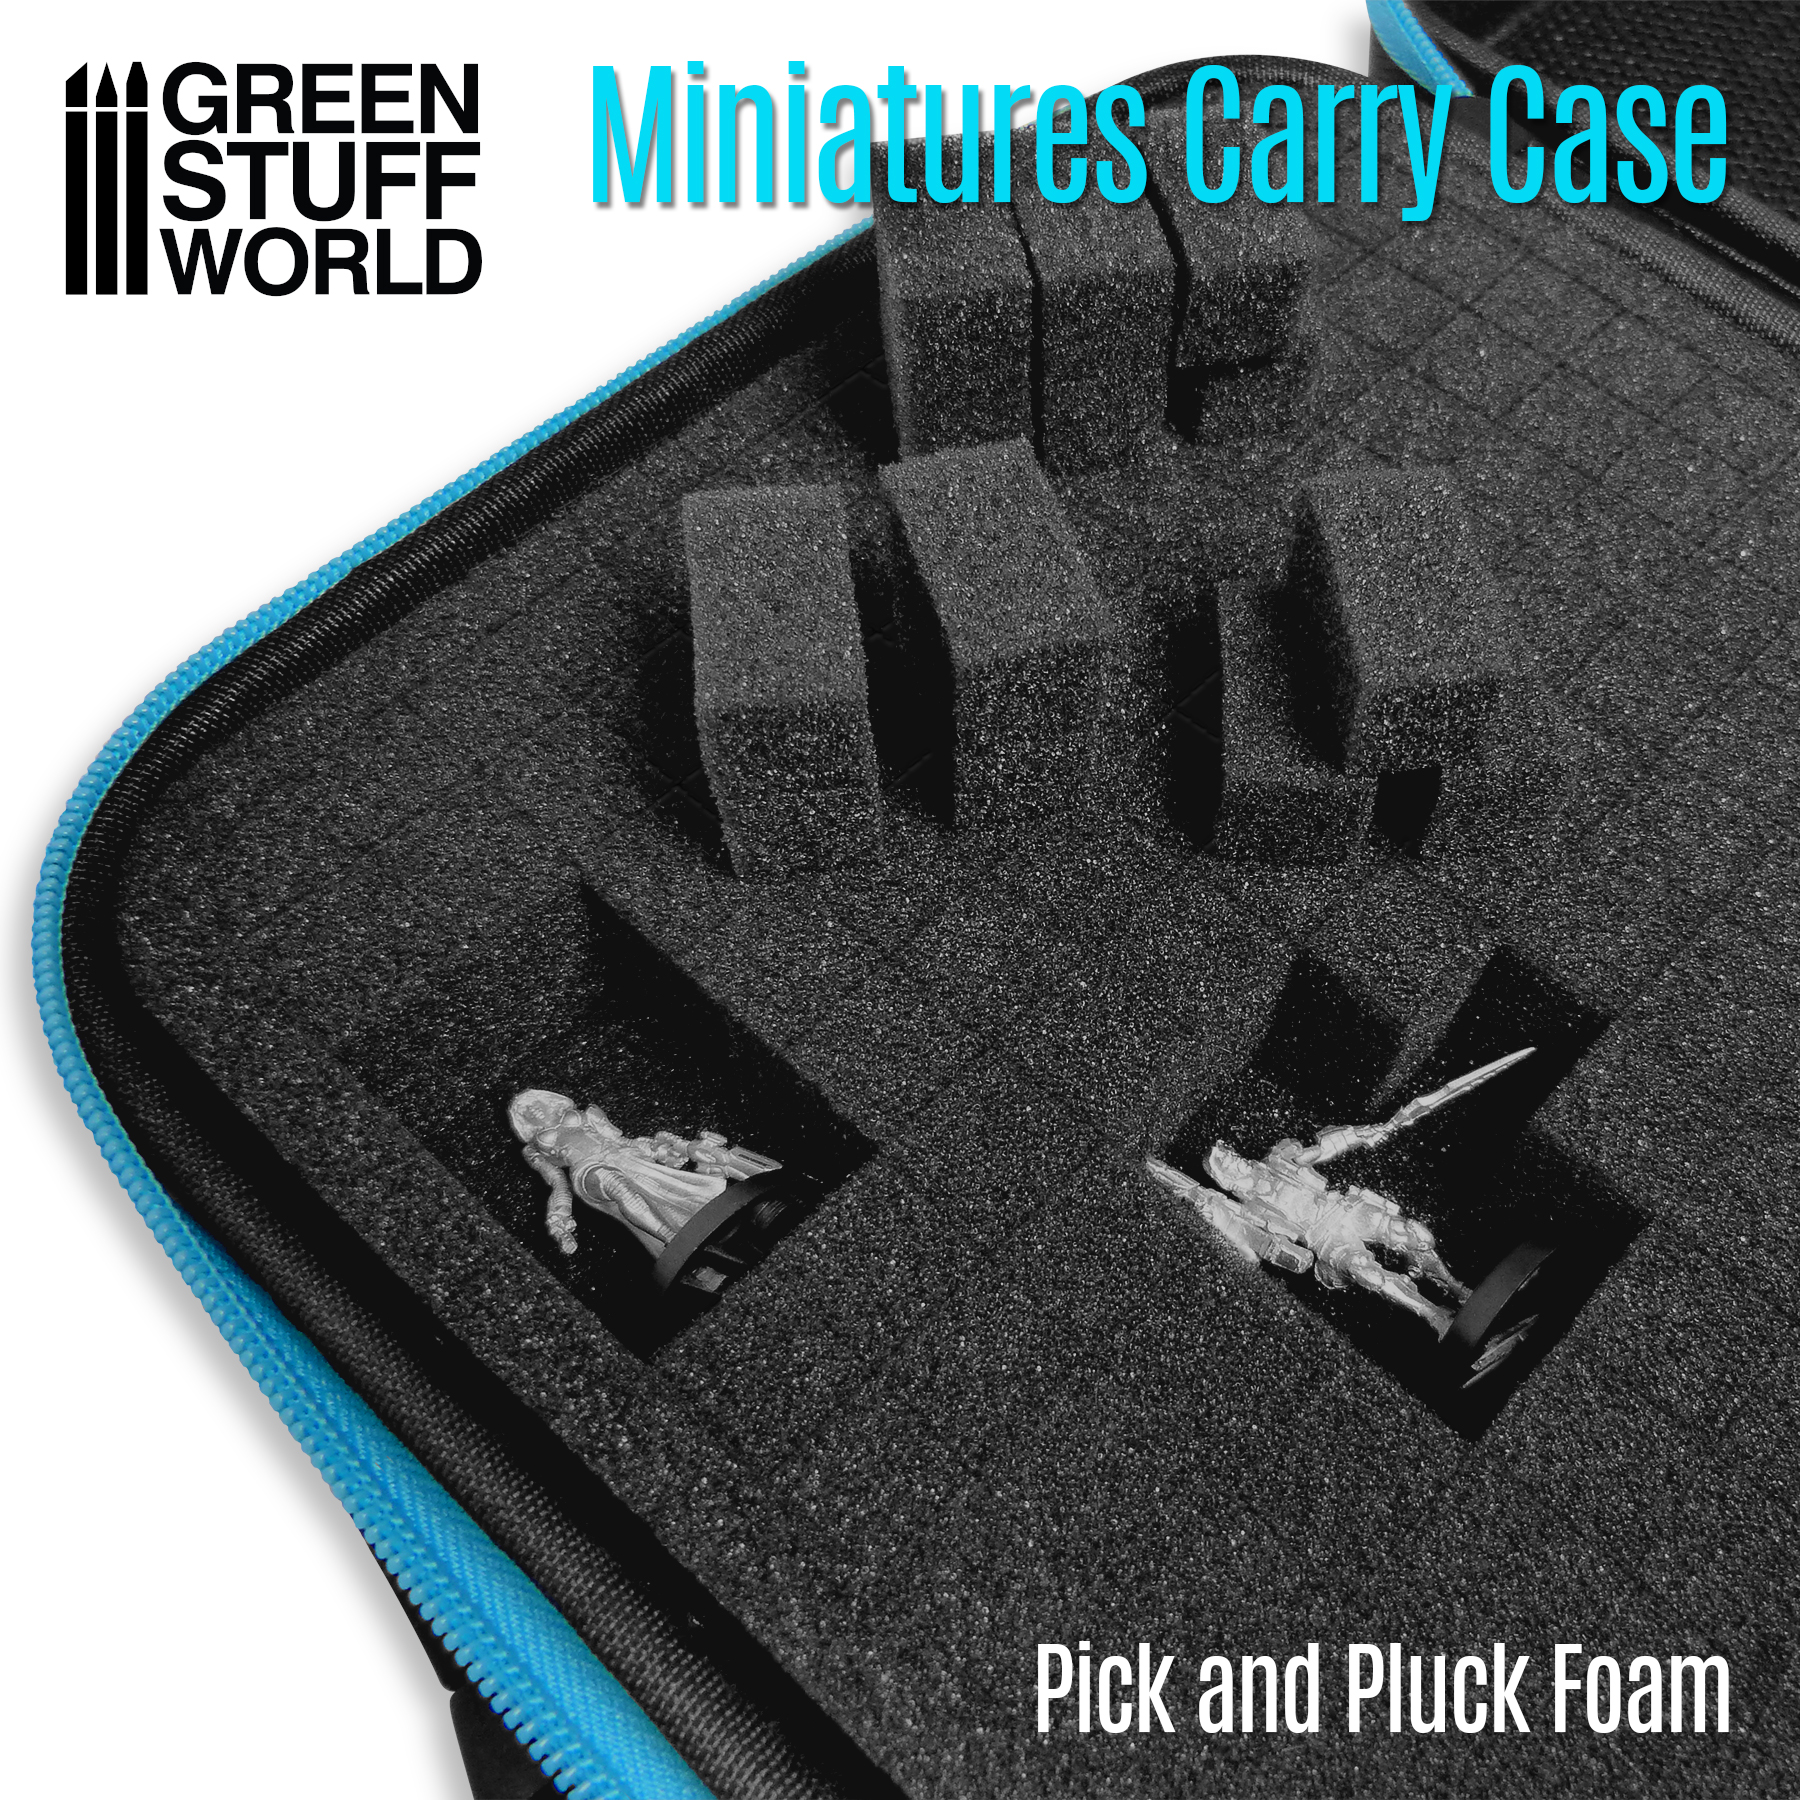 ▷ Transport Case with Pick and Pluck Foam